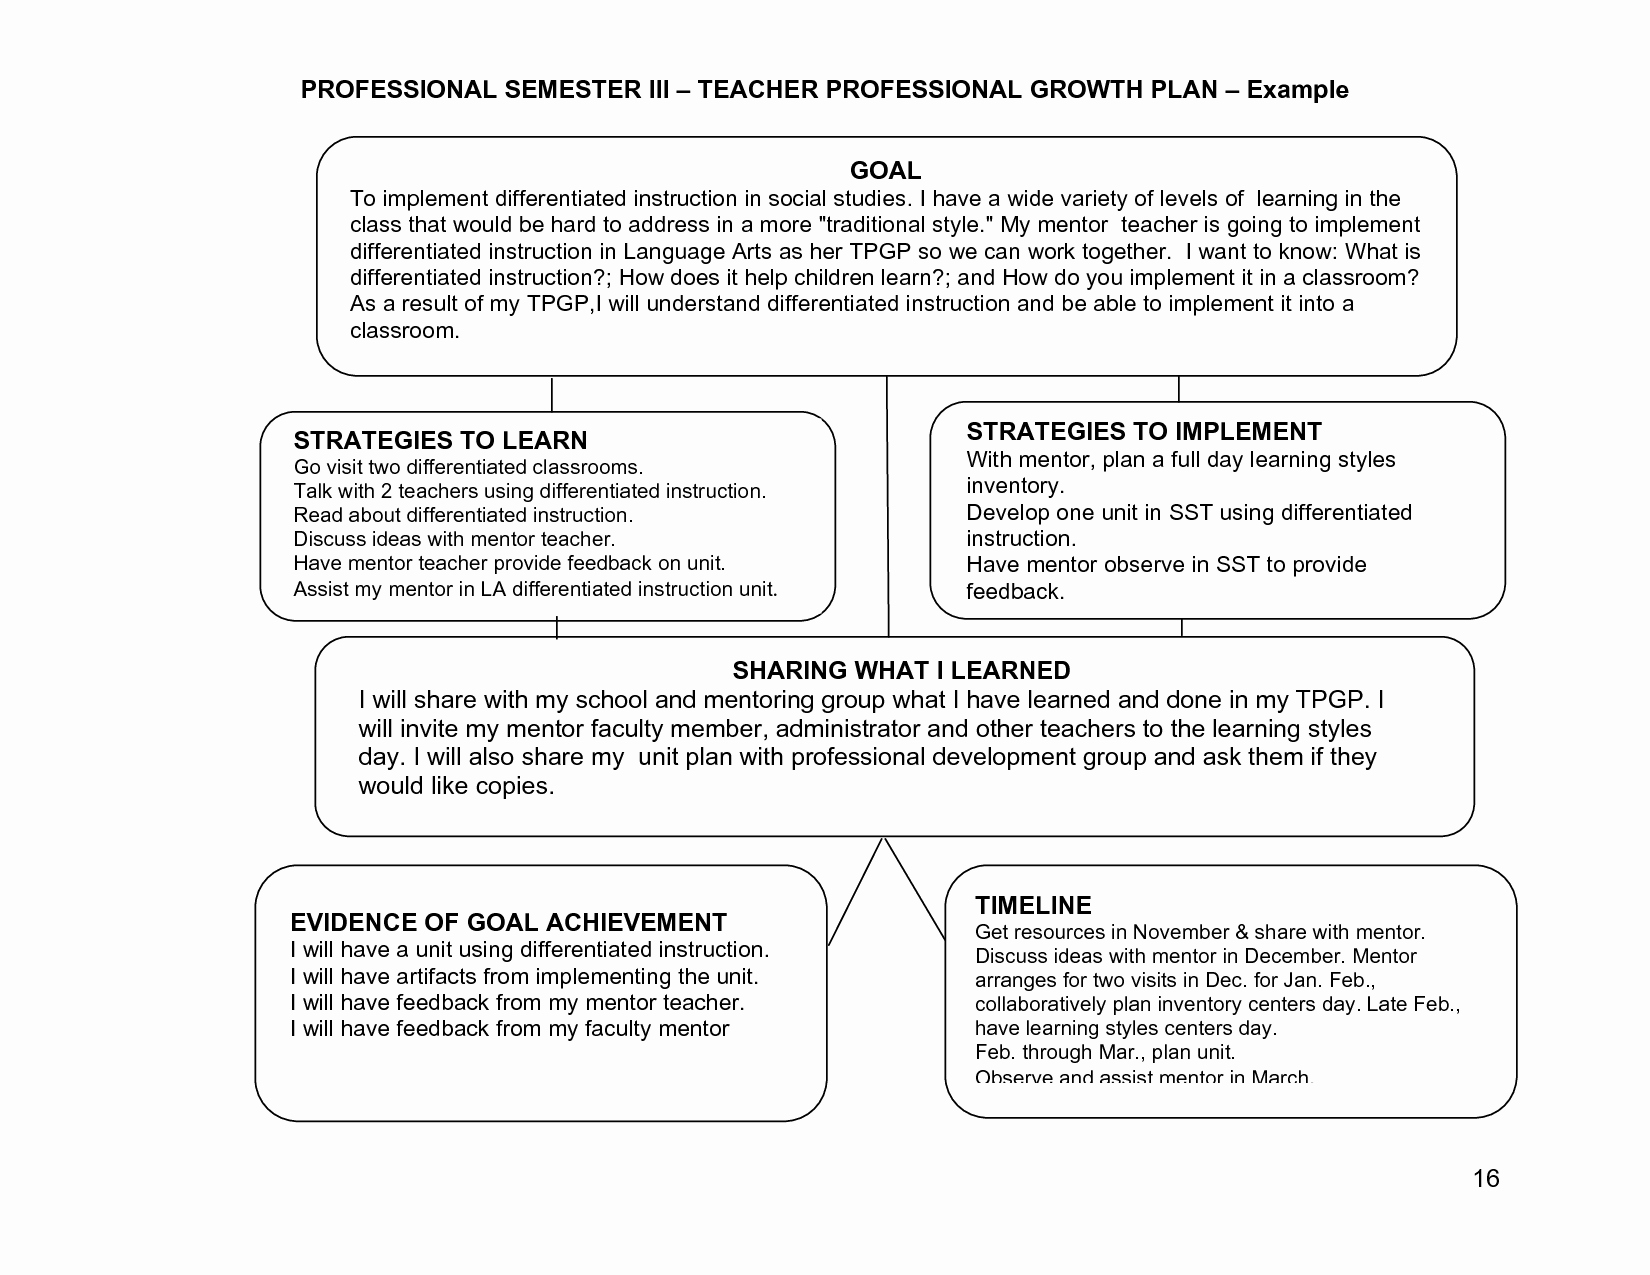 Professional Development Plan Template New Learning Plans or Goals for Teachers